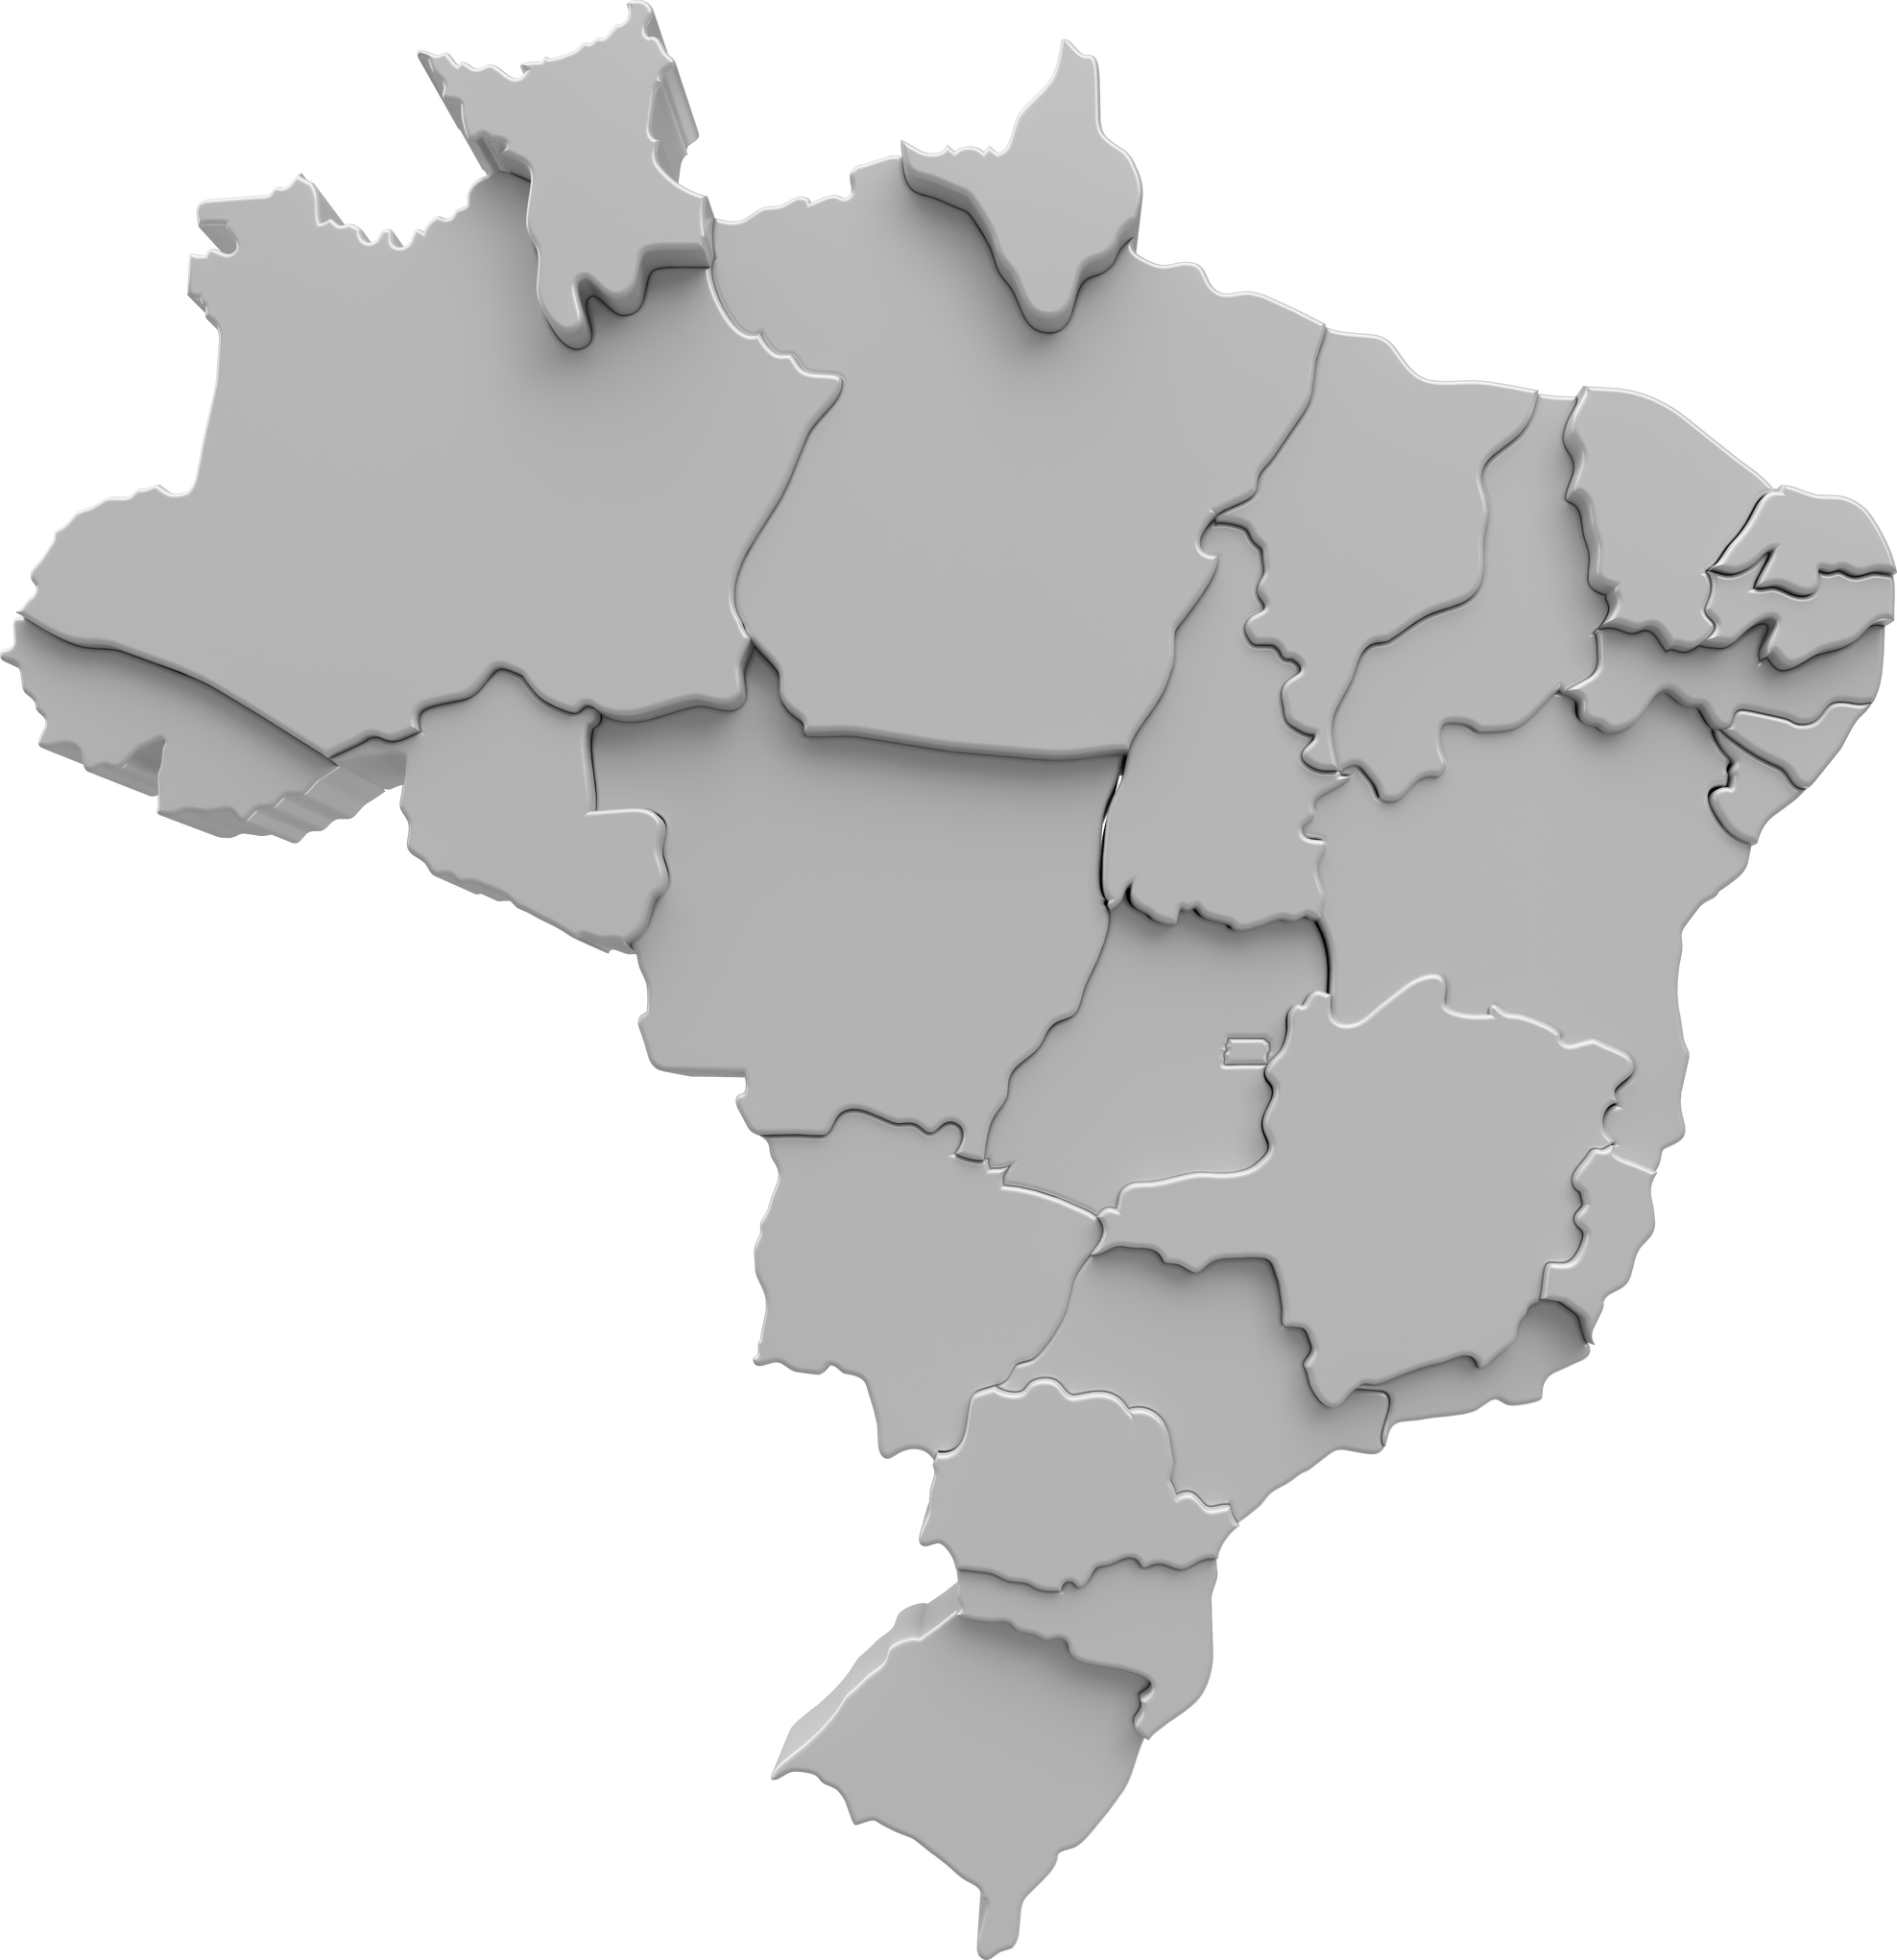 Brazil map with states highlighted in 3d render